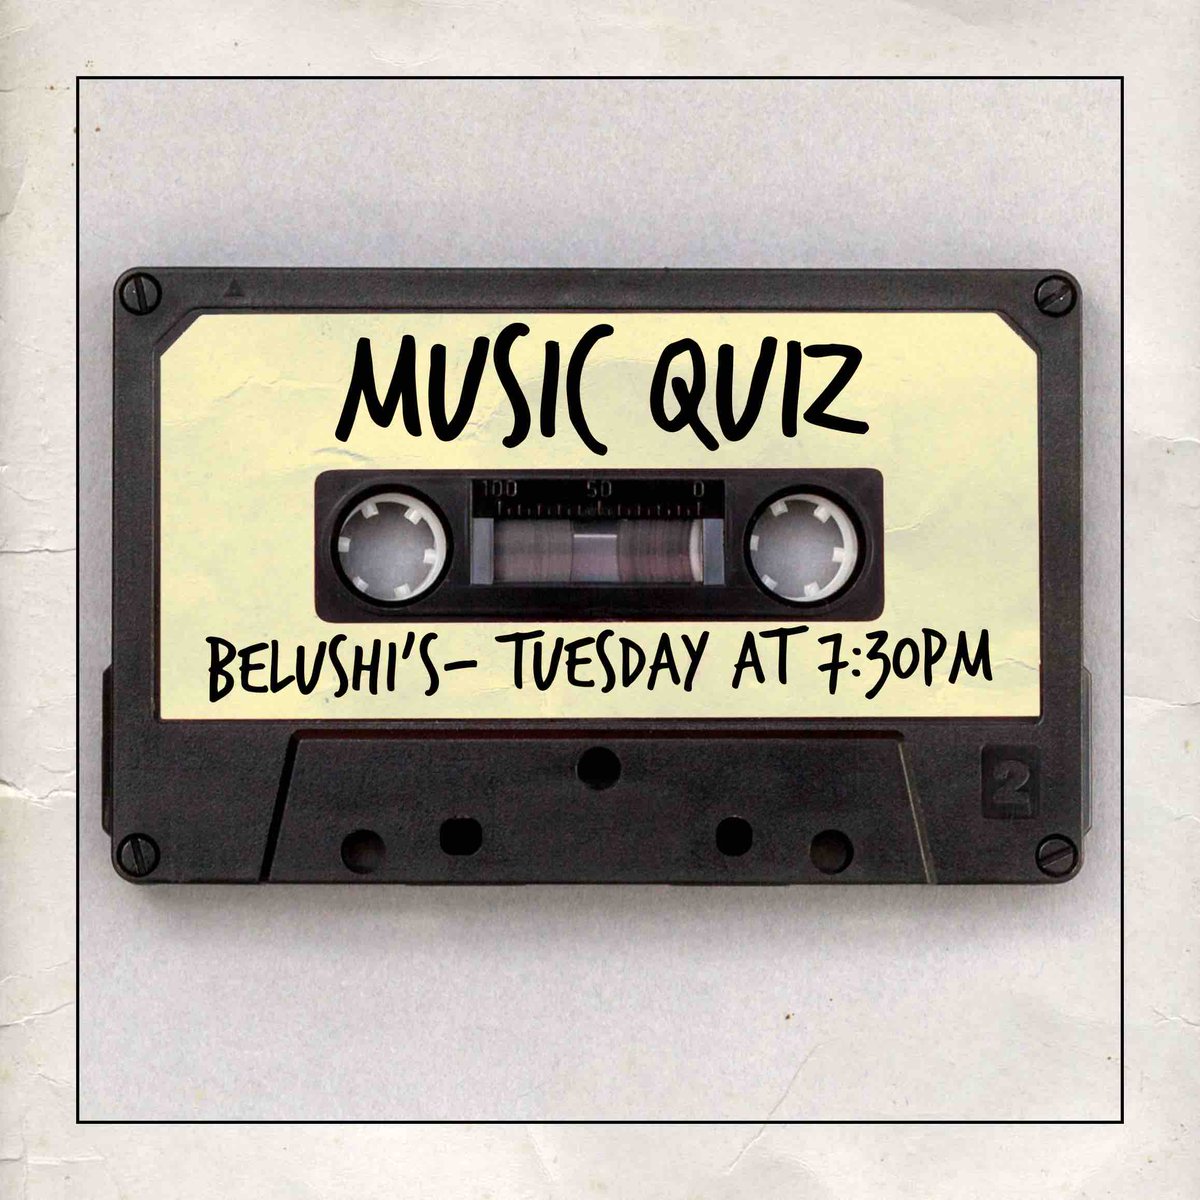 Join us on Tuesday at #Belushis in #Bath for our next #QuizNight! 7:30pm start for our #Music #Quiz with great prizes to be won